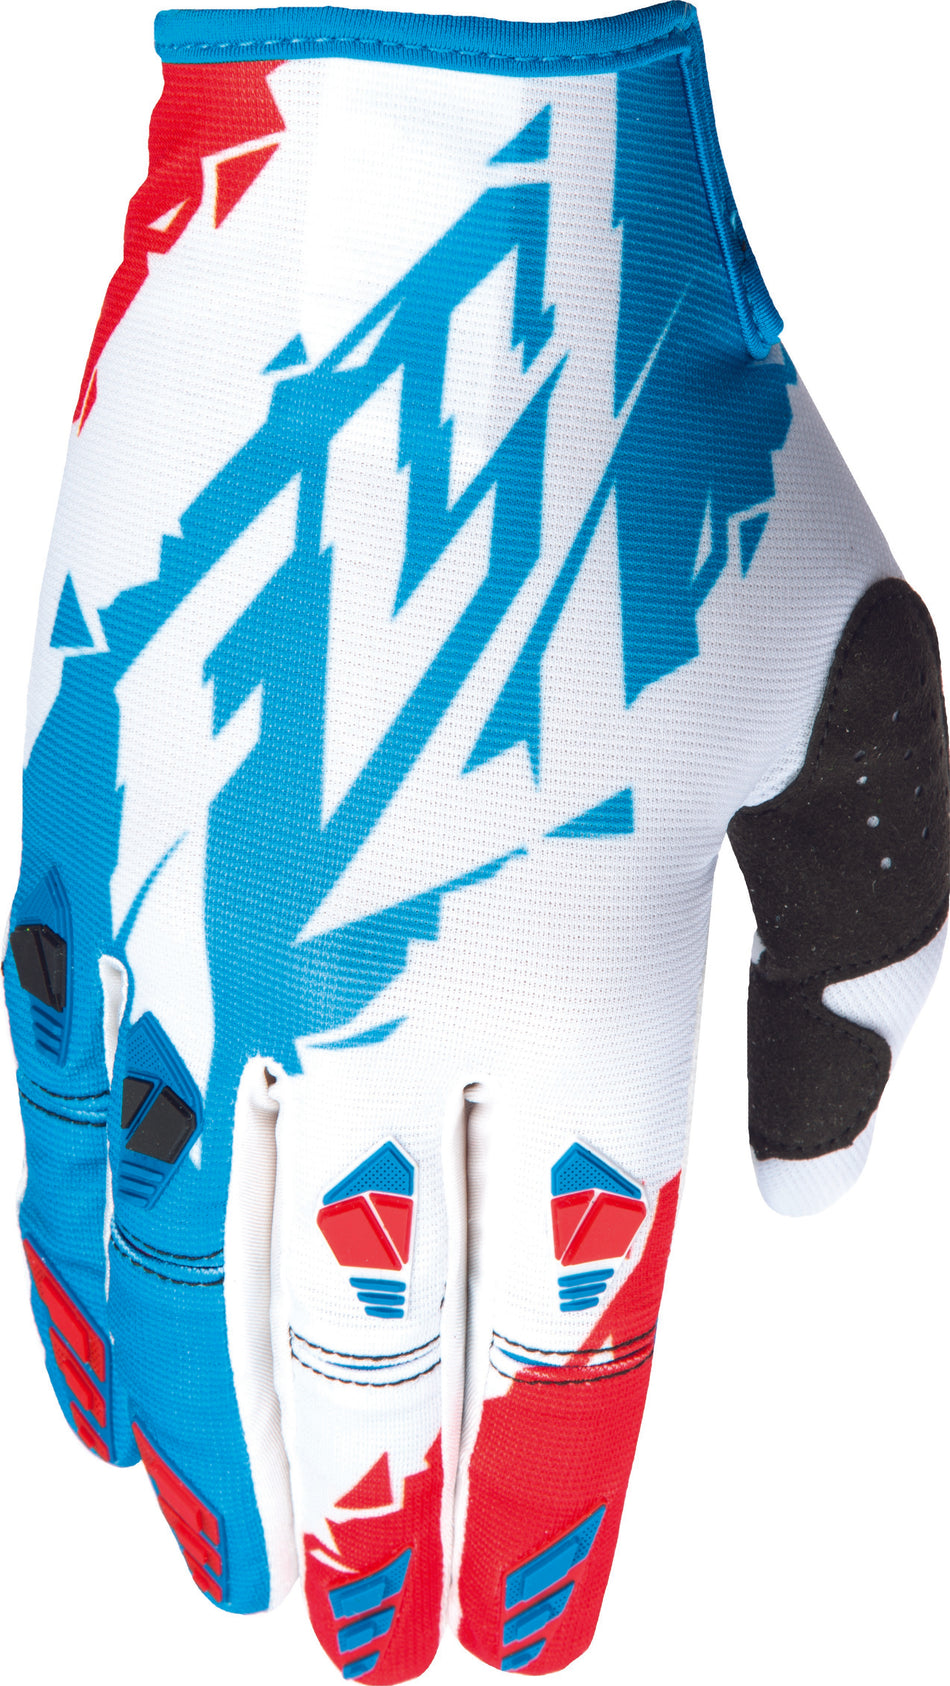 FLY RACING Kinetic Glove Red/White/Blue Sz 13 3x 370-41113